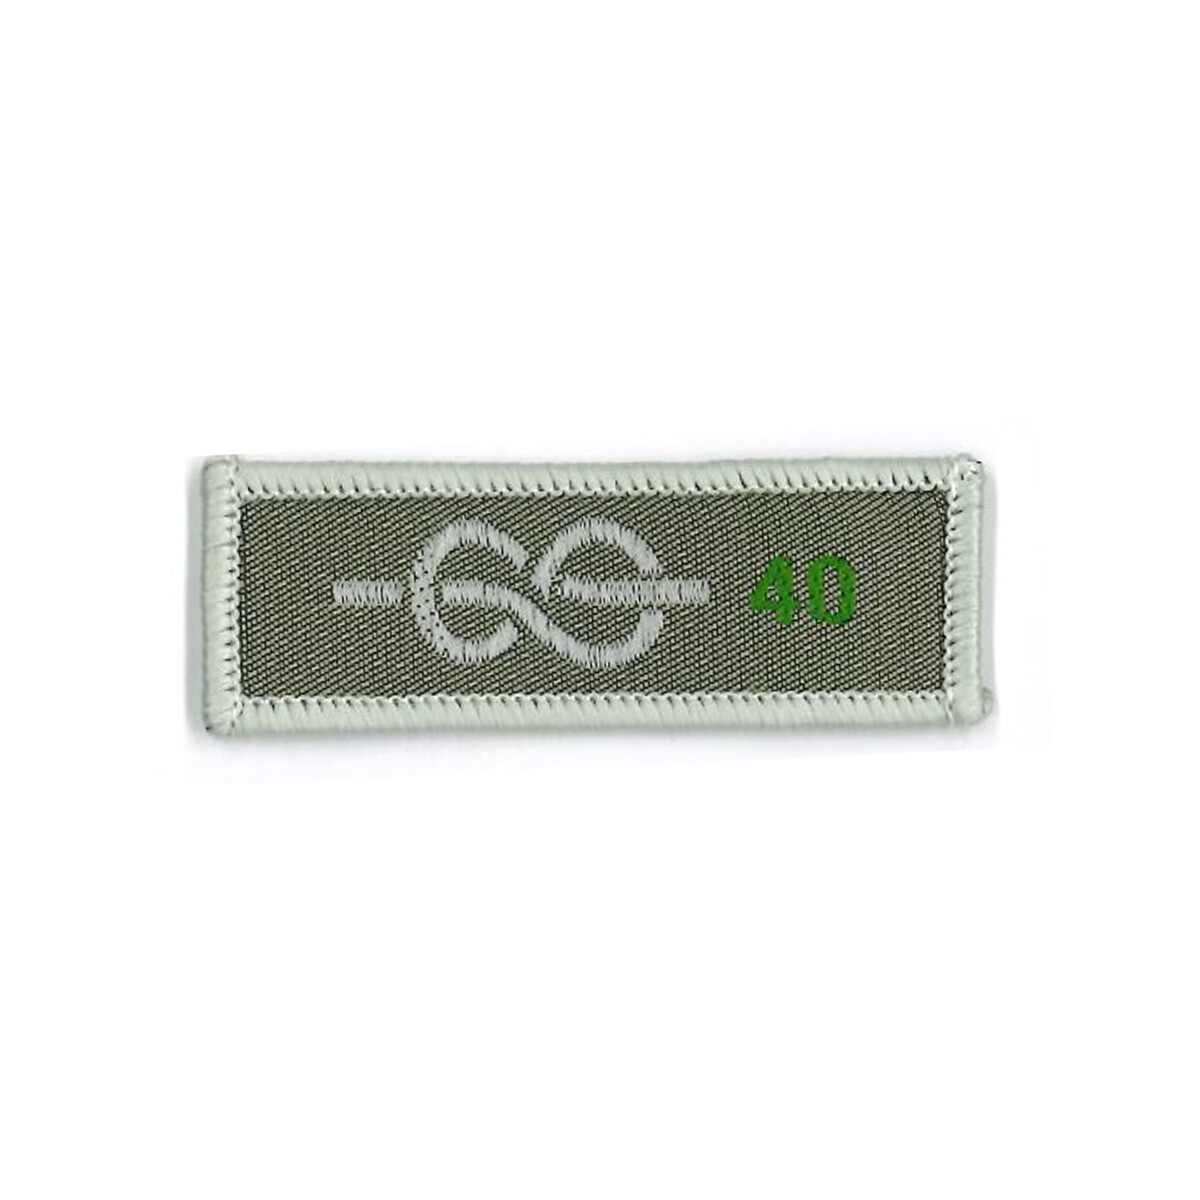 40 Yrs Chief Scout's Service Award Cloth Badge -